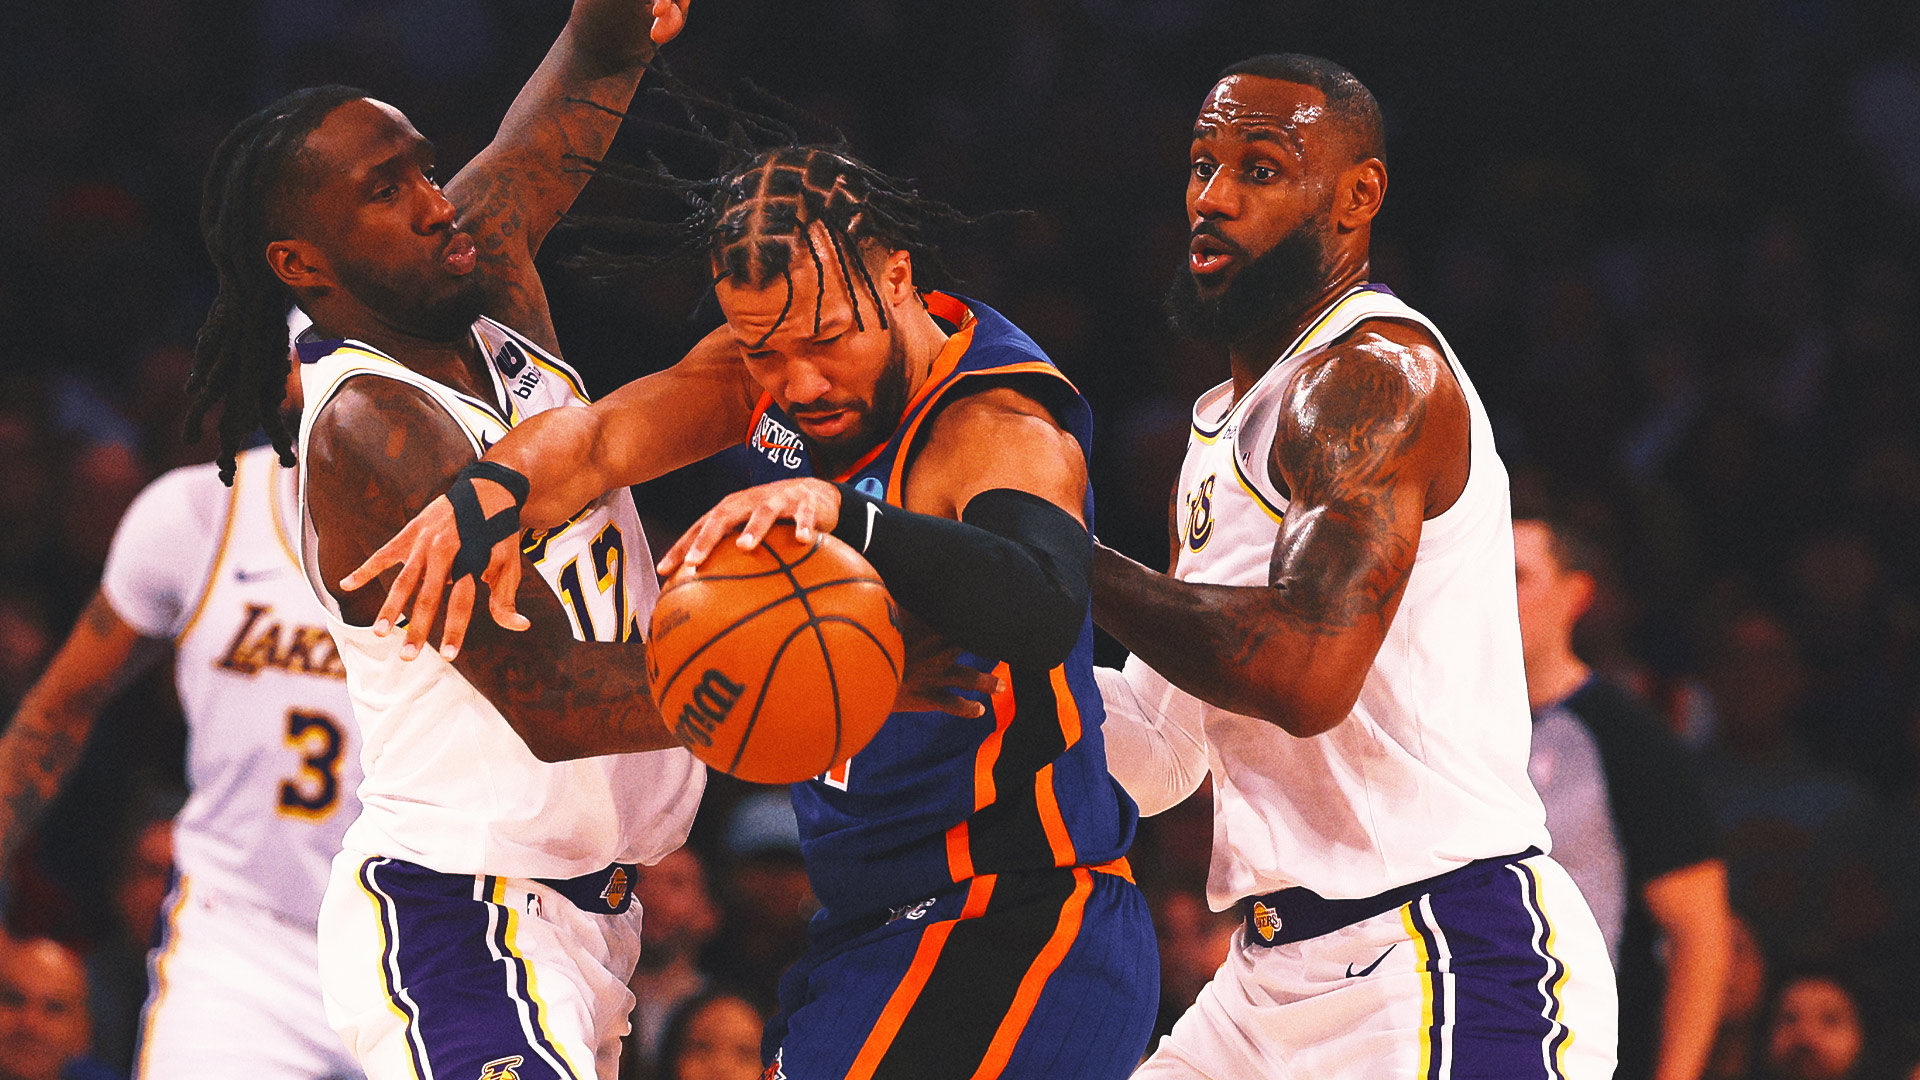 LeBron James, Lakers pull away for 113-105 win to end Knicks' winning streak